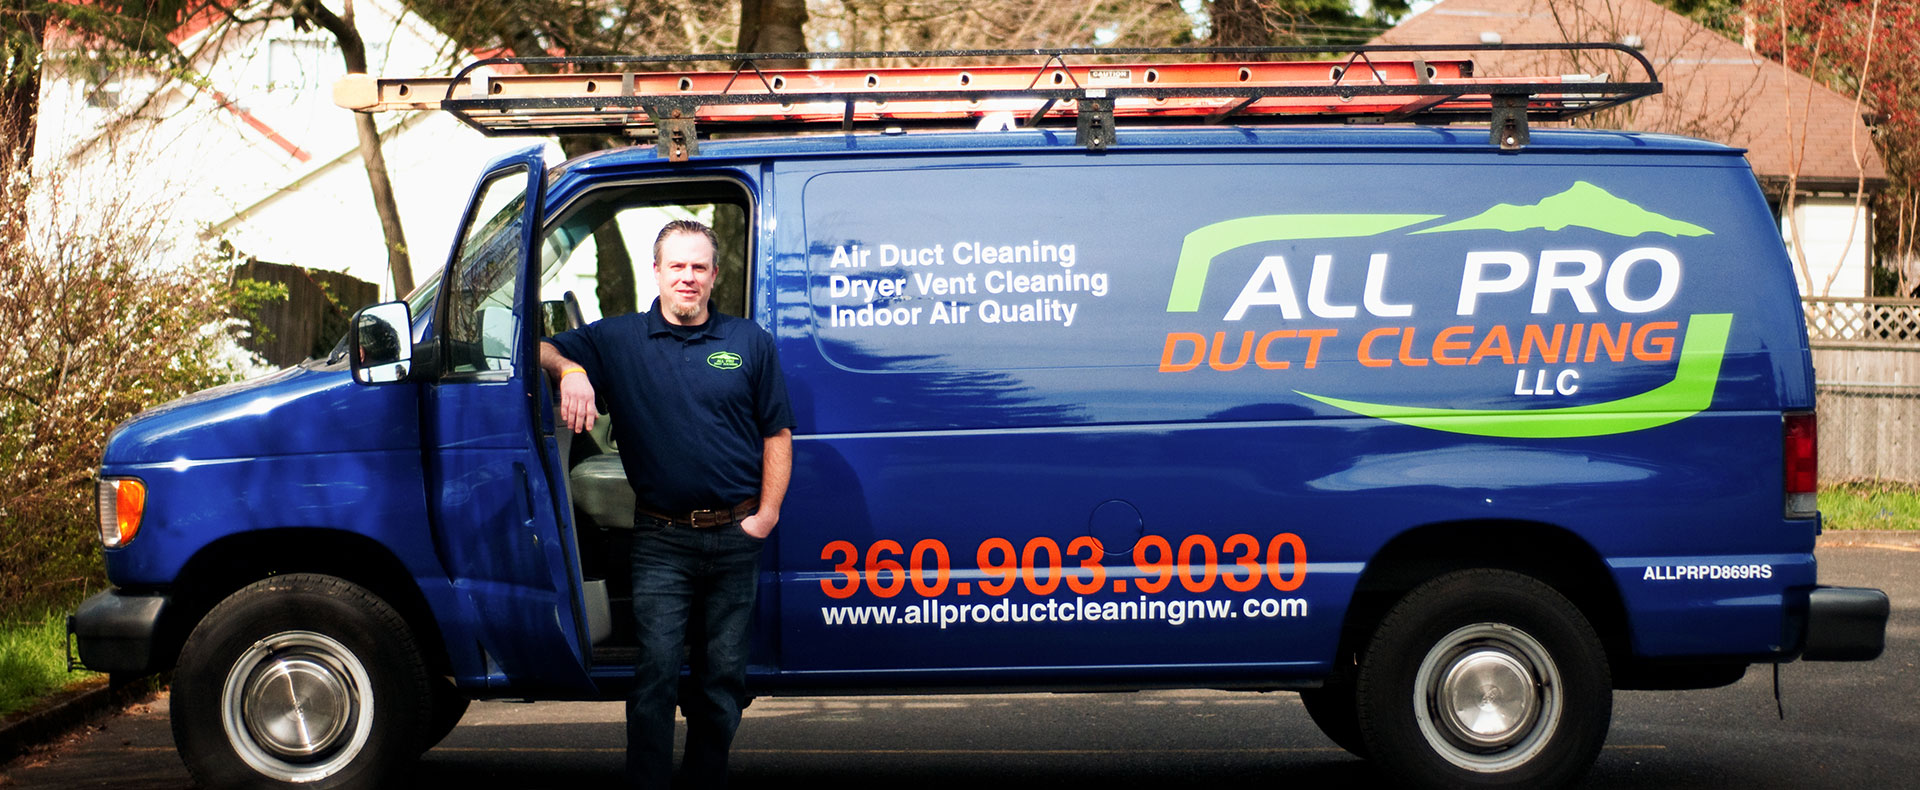 Air duct cleaning services provided by All Pro Duct Cleaning serving Vancouver Washington Portland Oregon